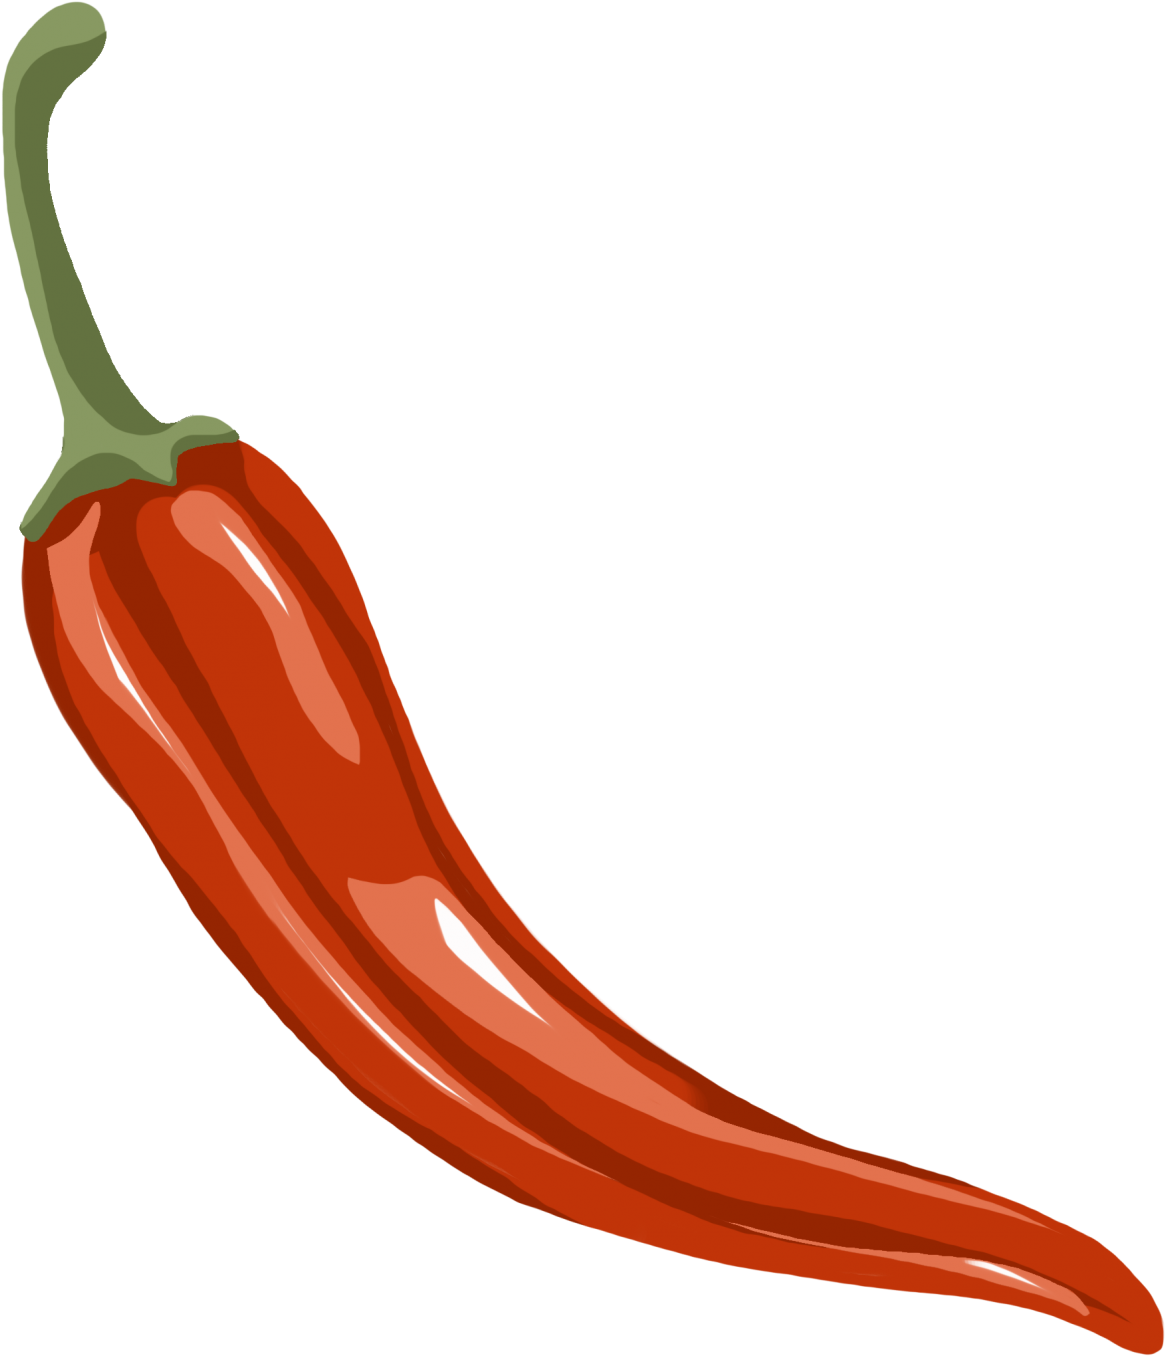 Red Chili Pepper Illustration PNG